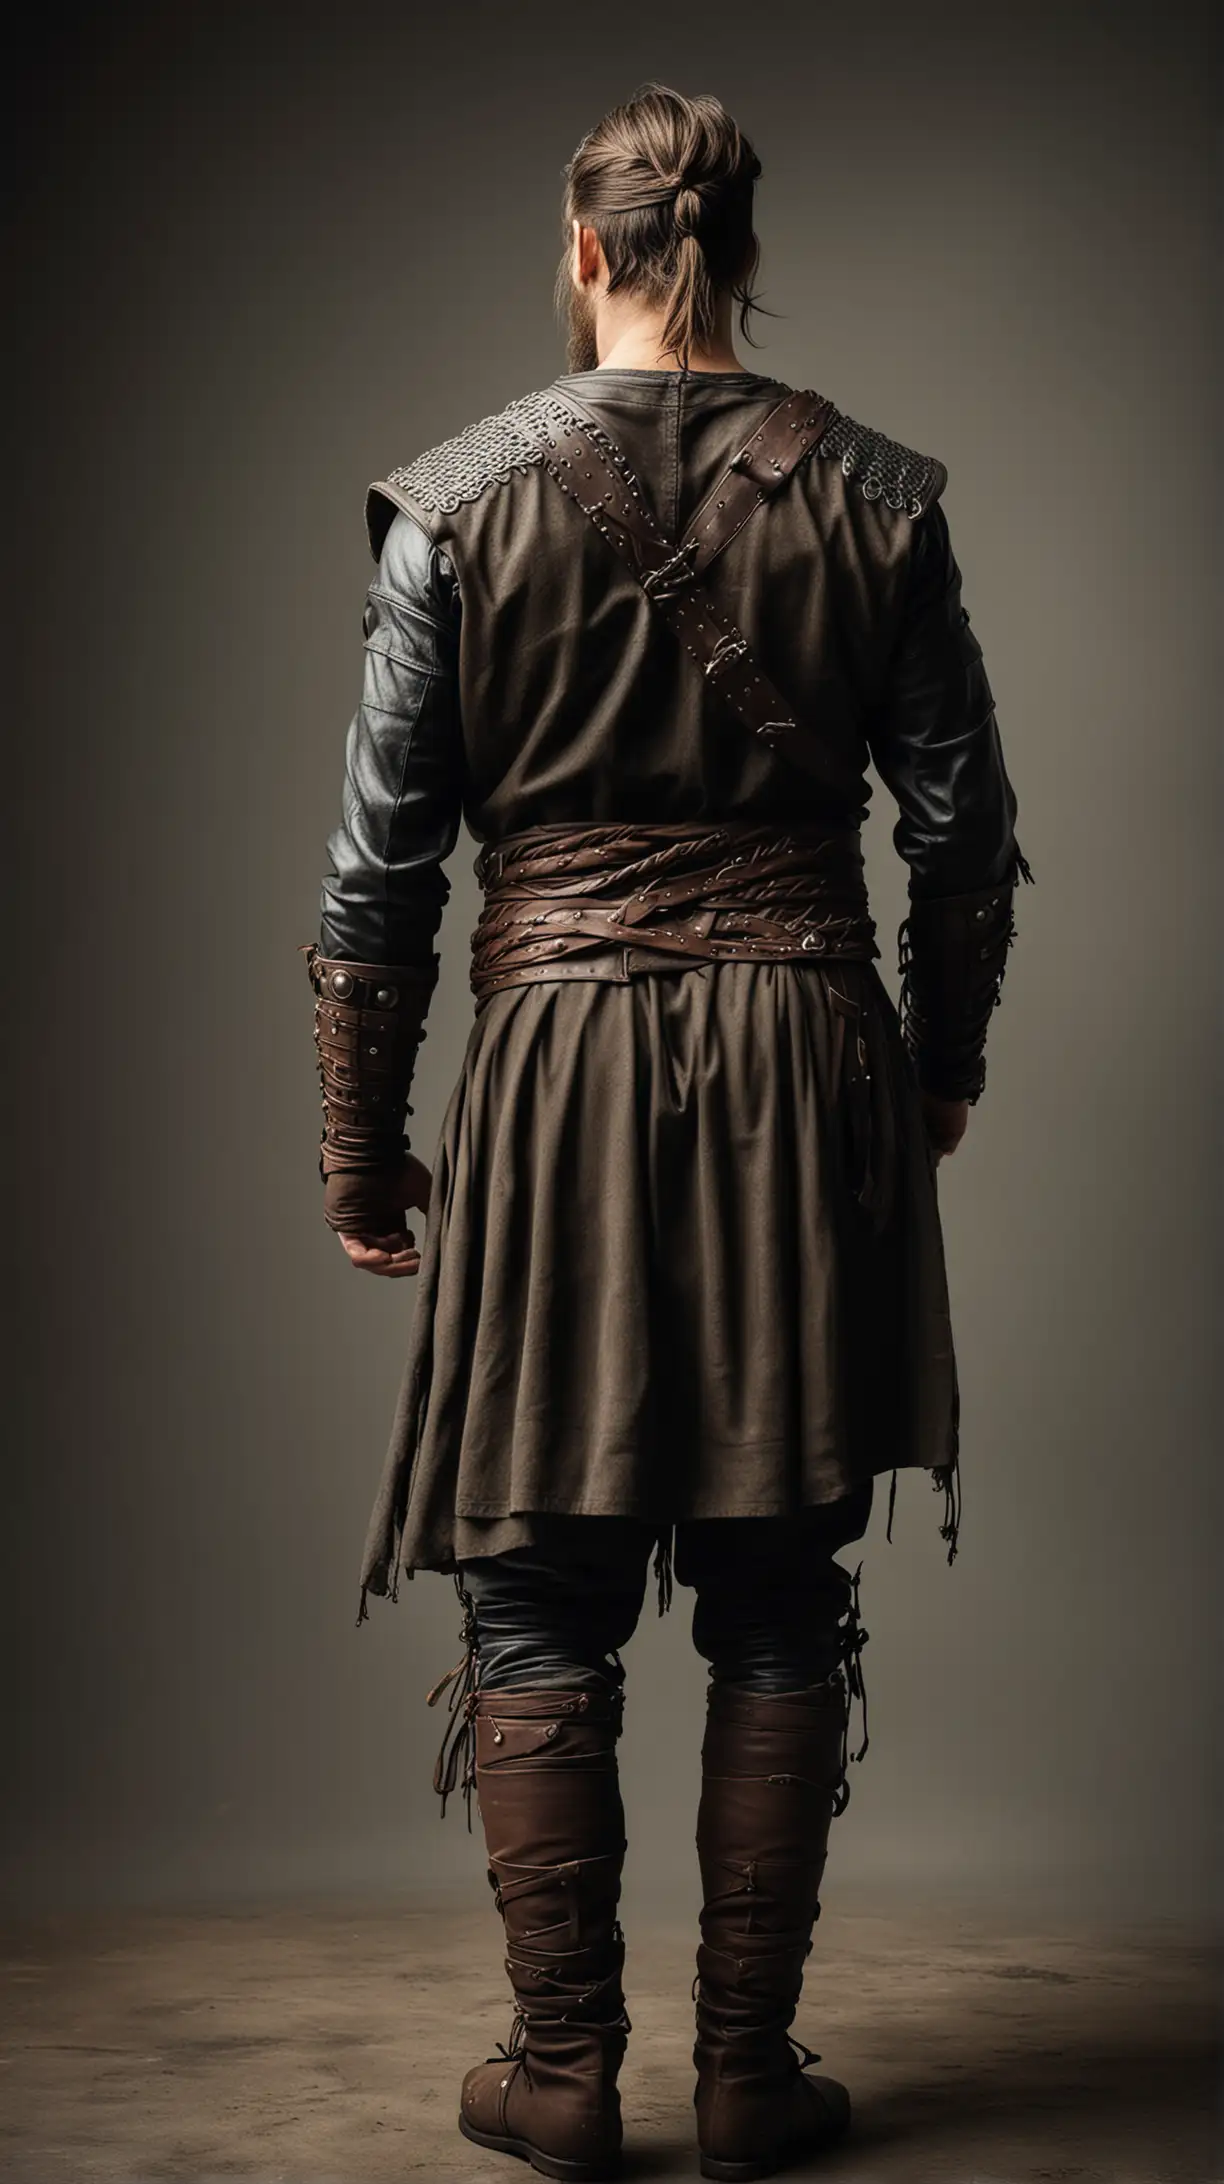 photo taken from behind, showing a muscular viking warrior, back view, no side or face shown, full body, short dark hair tied in knot, viking clothes, leather sleeves